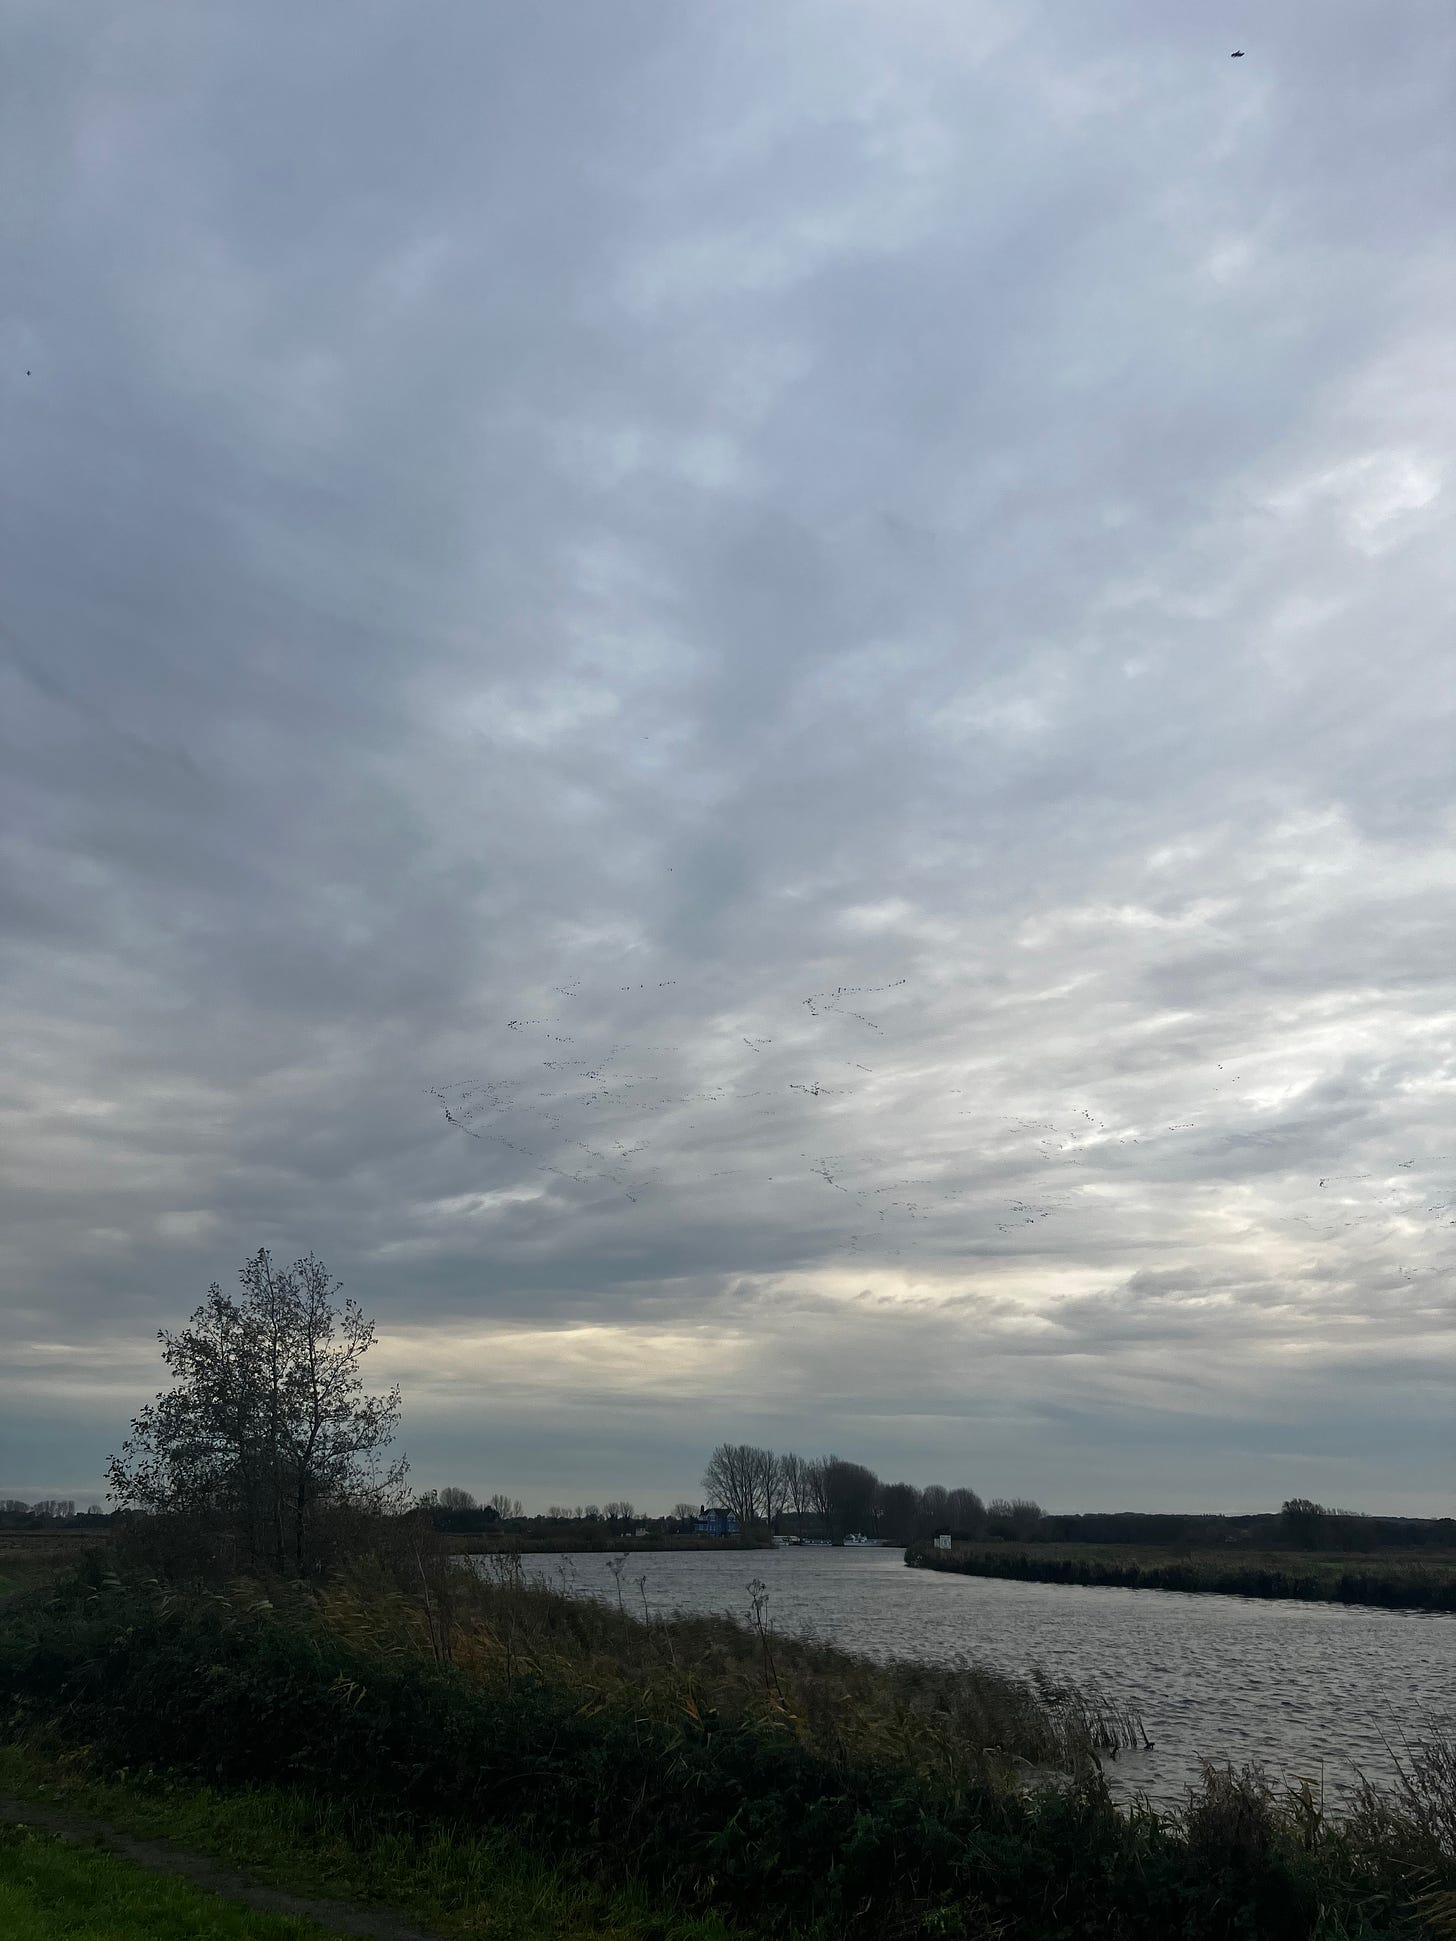 It's a cold day in early winter. Geese fly in vs in a big Norfolk sky that is filled with grey clouds. The River curves off into trees in the distance